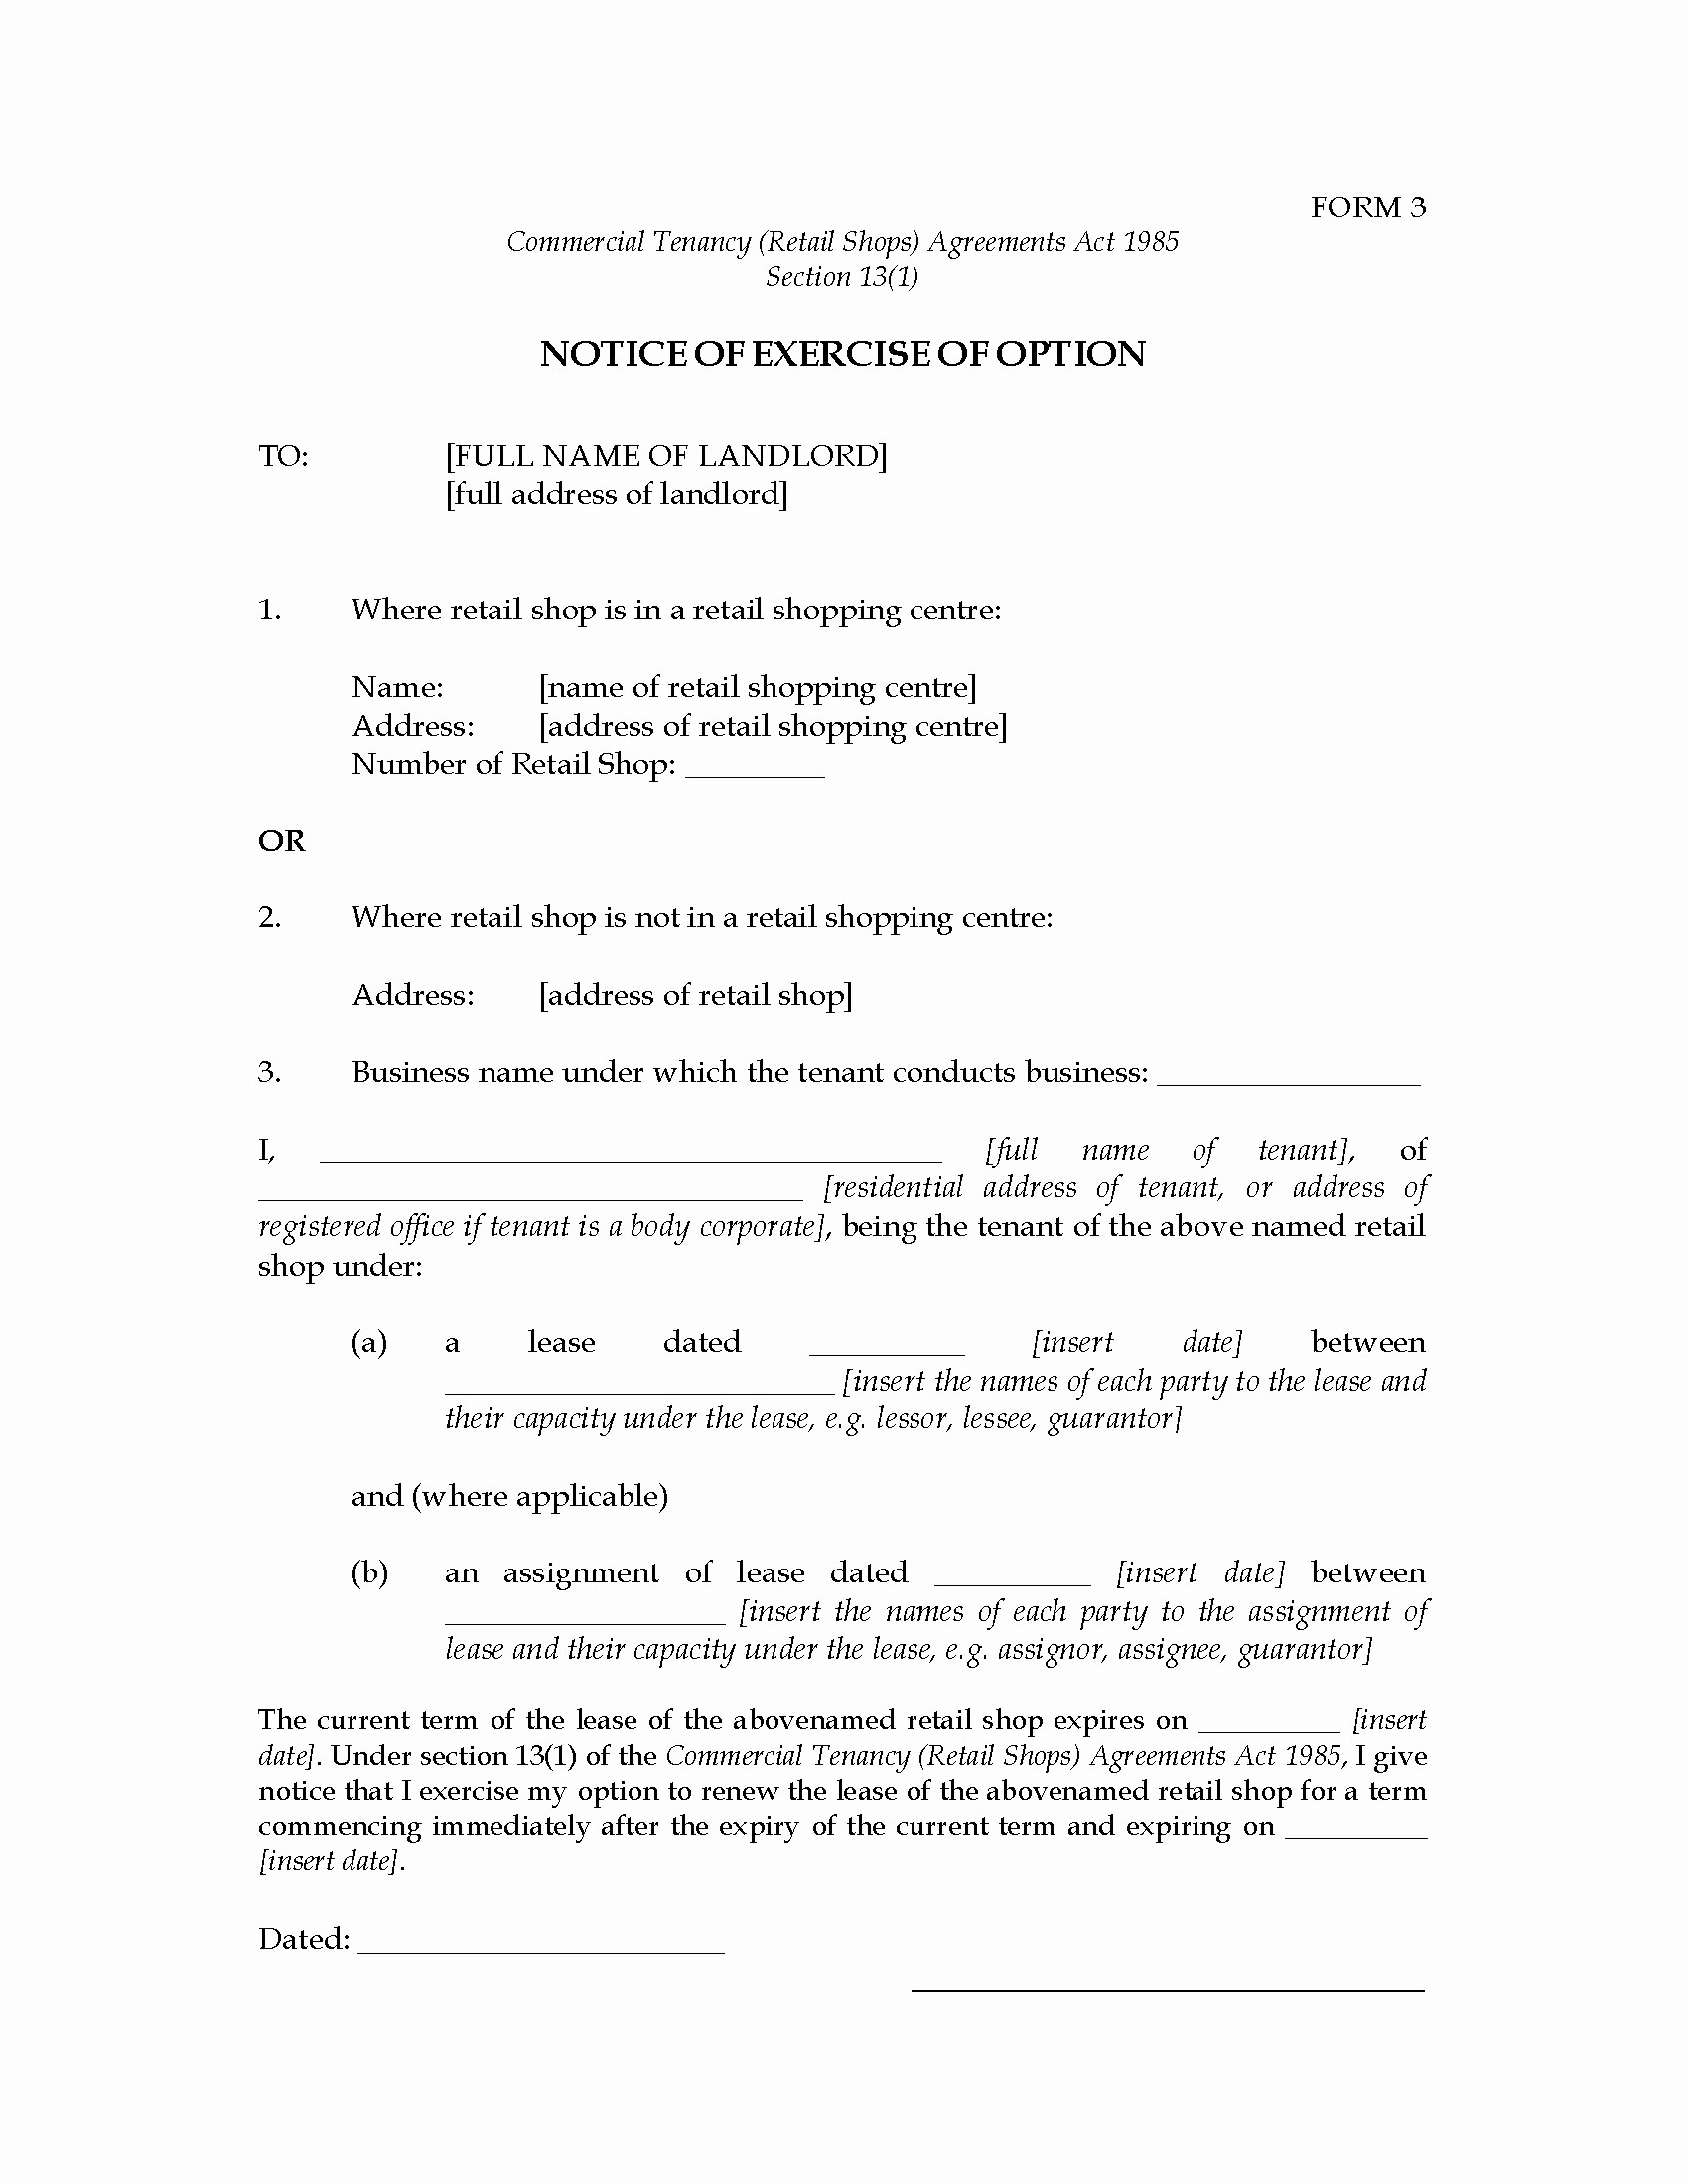 Option to Renew Lease form Lovely Western Australia Notice Of Exercise Of Option to Renew